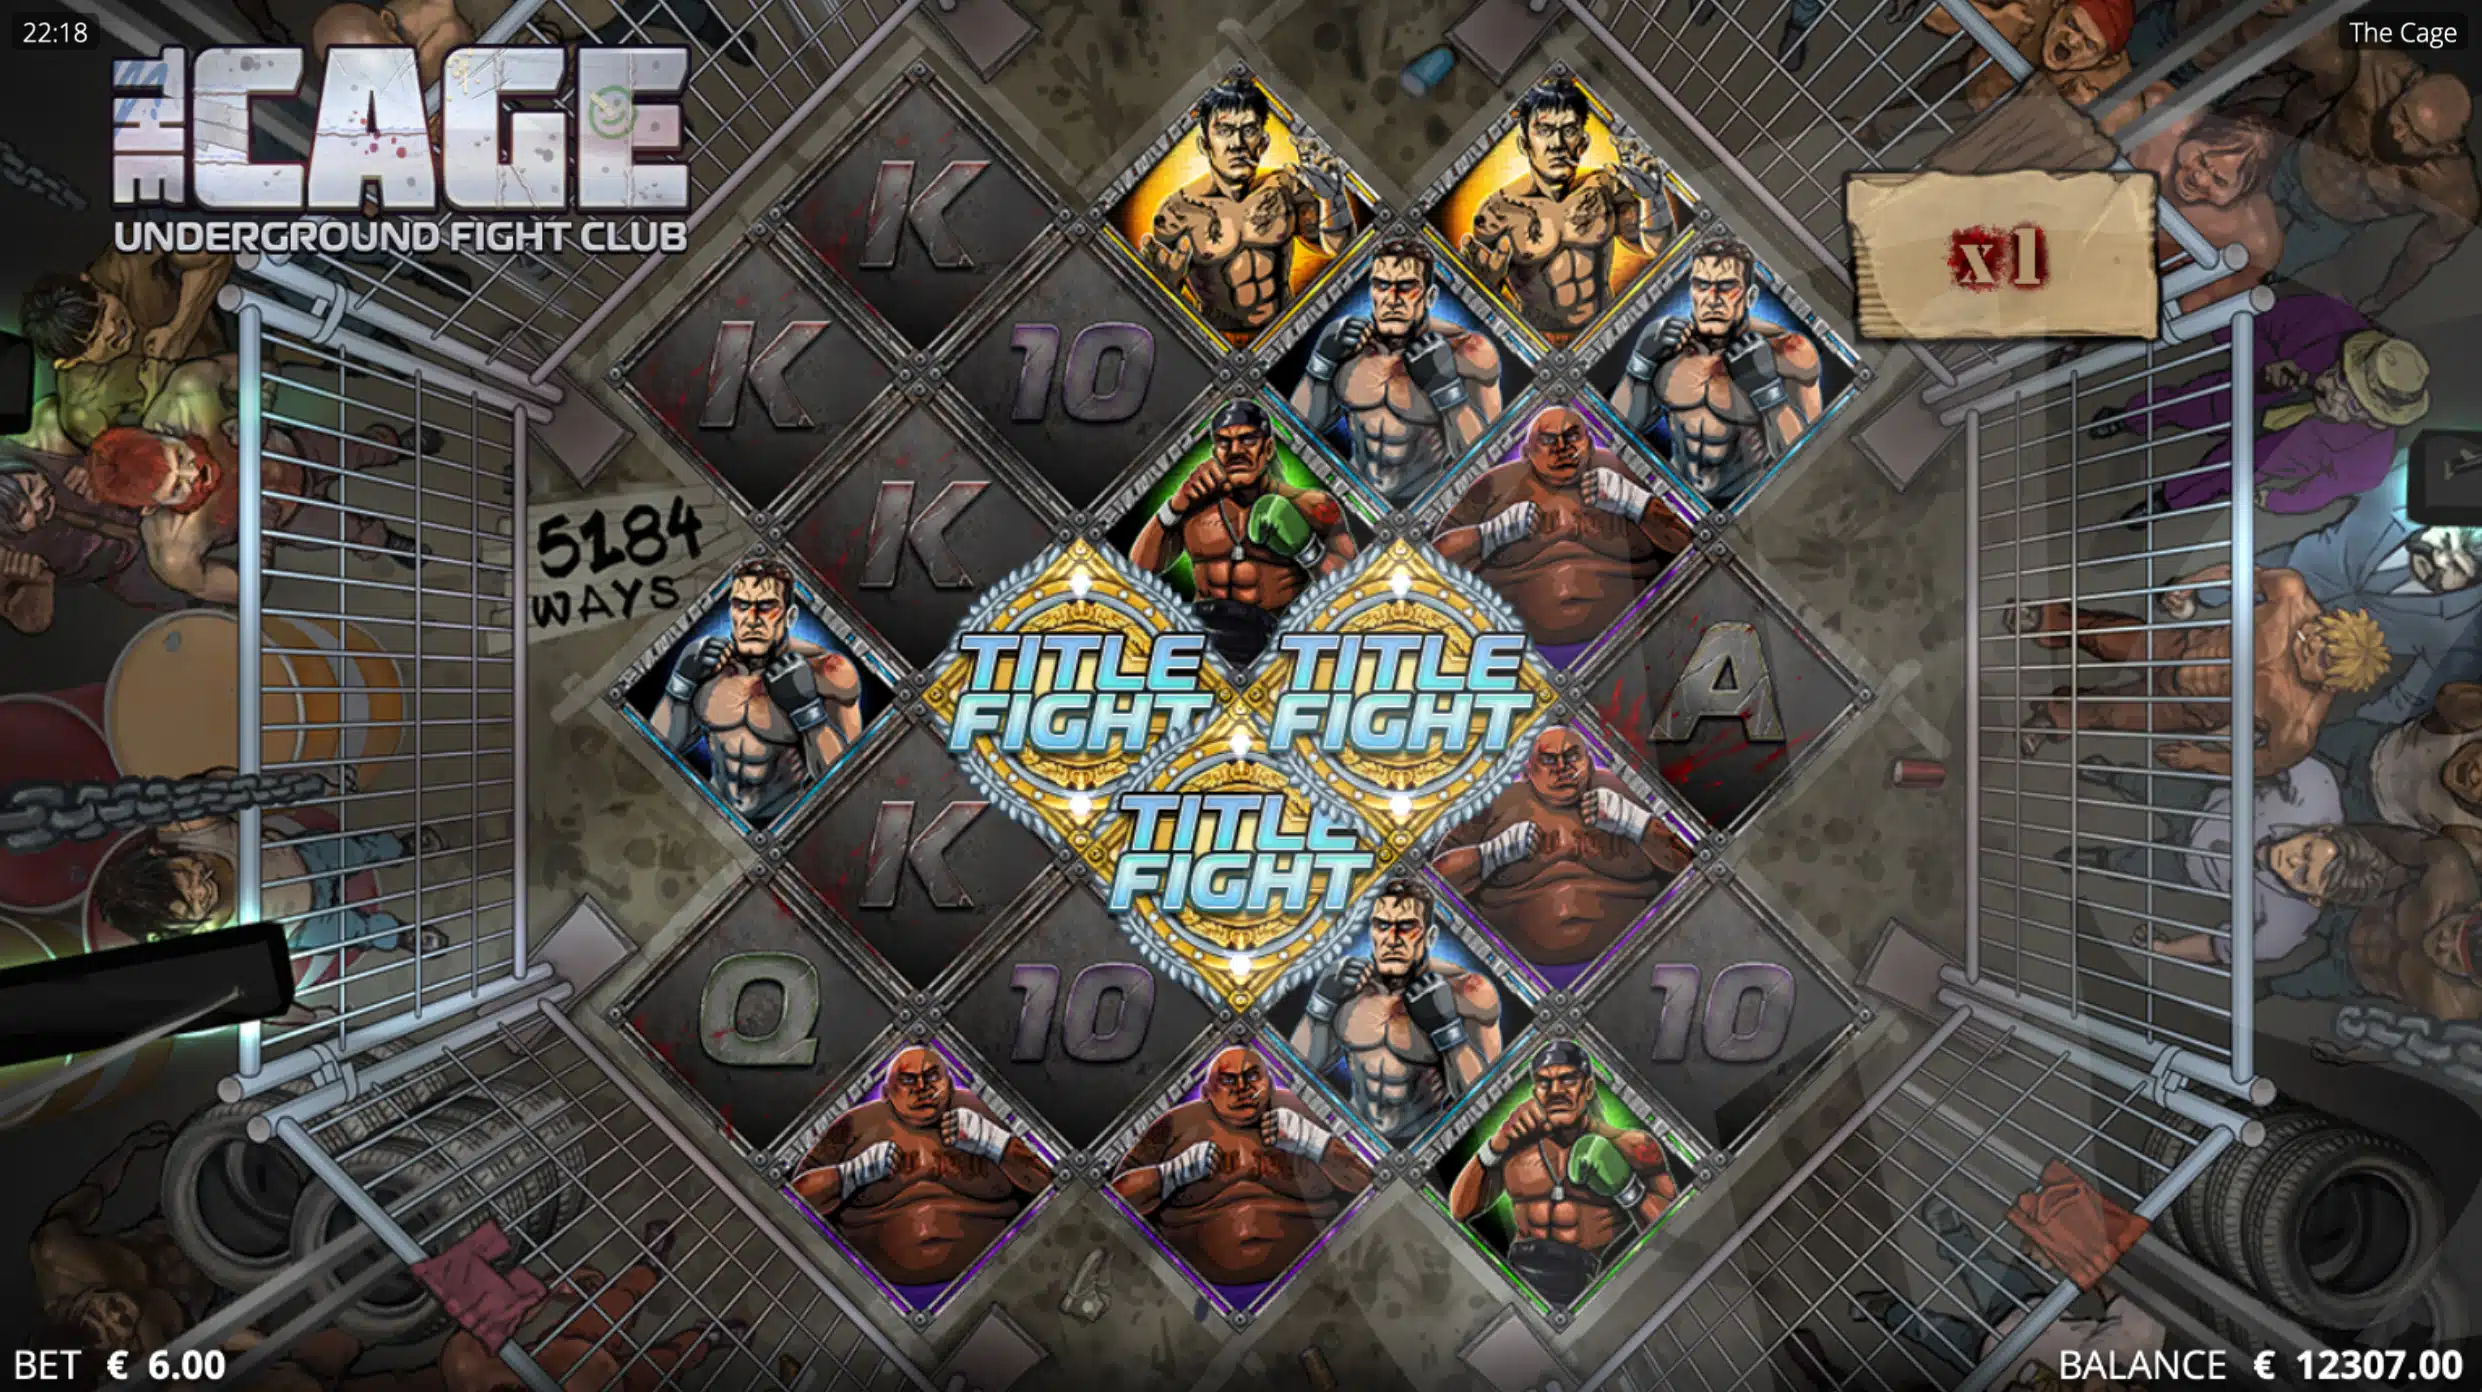 Land 3 Scatter Symbols to Trigger Title Fight Freespins